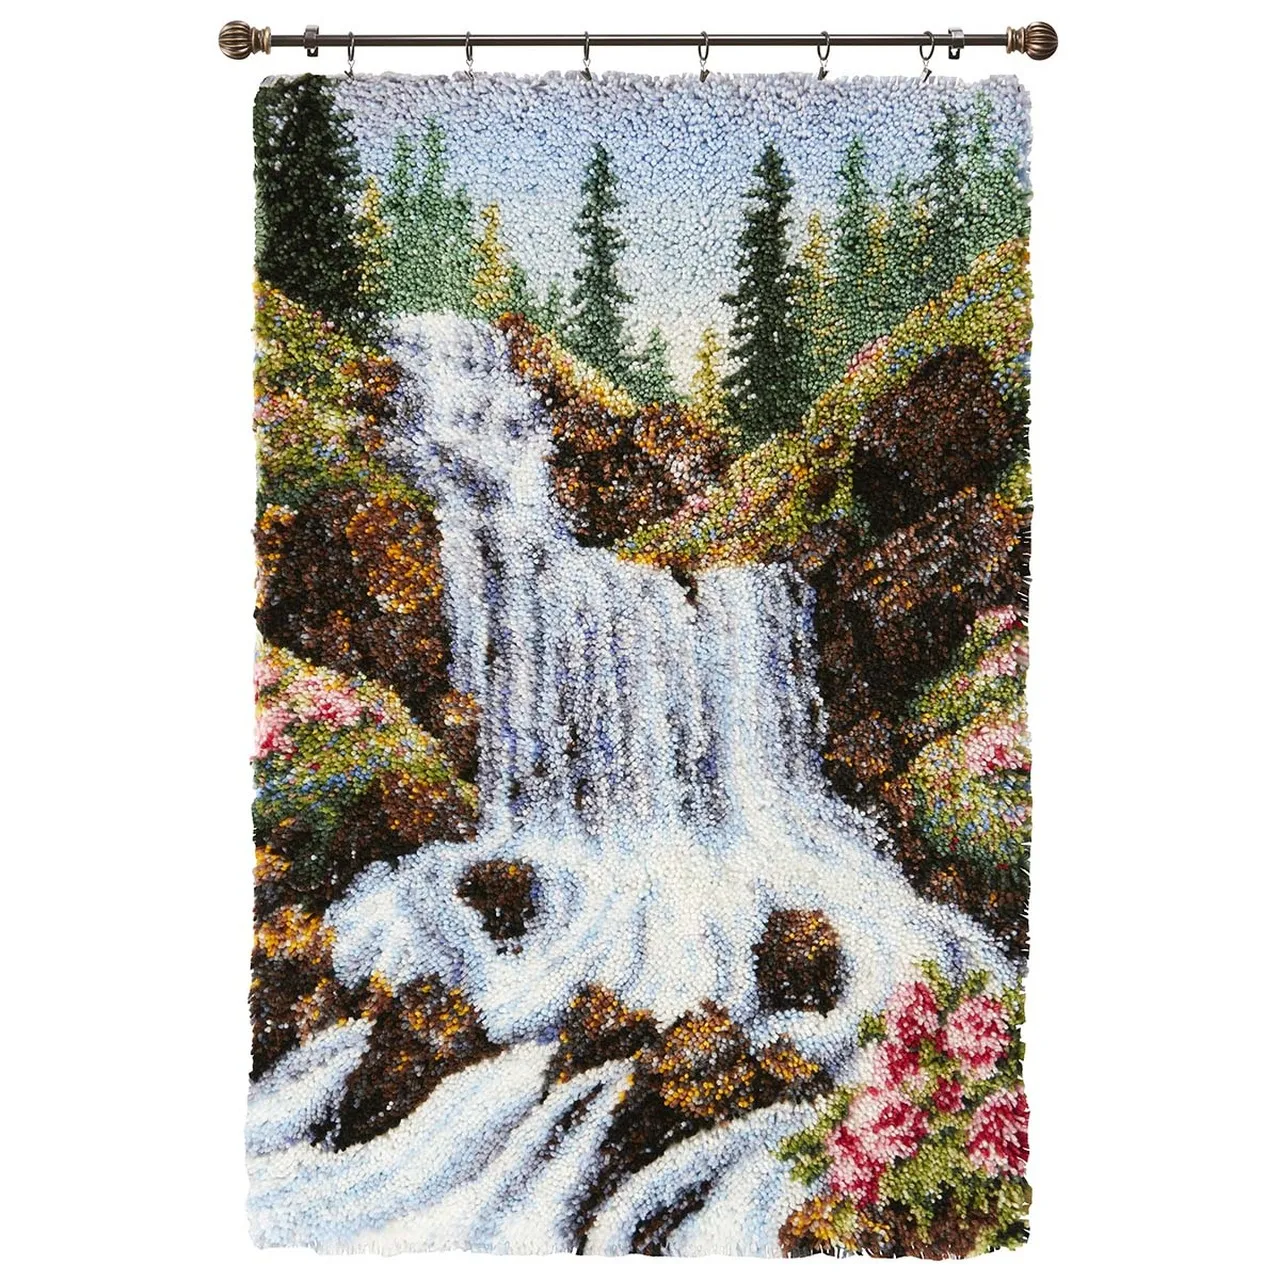 

Latch Hook Kits Springtime Waterfall Wall Hanging DIY Carpet Rug Pre-Printed Canvas with Non-Skid Backing Floor Mat 69x102cm